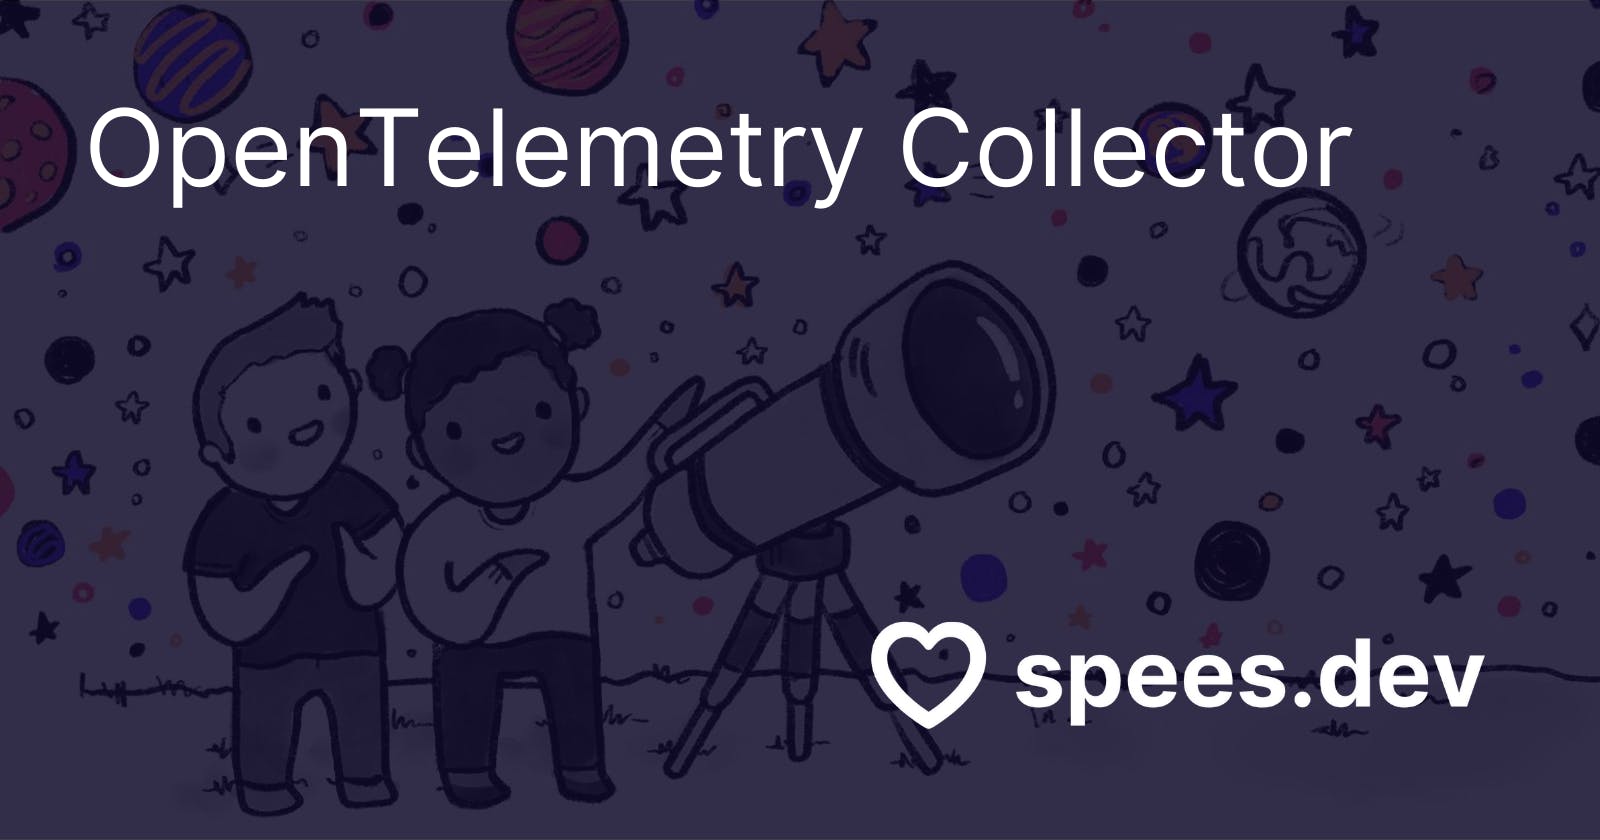 OpenTelemetry: what's a Collector and why would I want one?